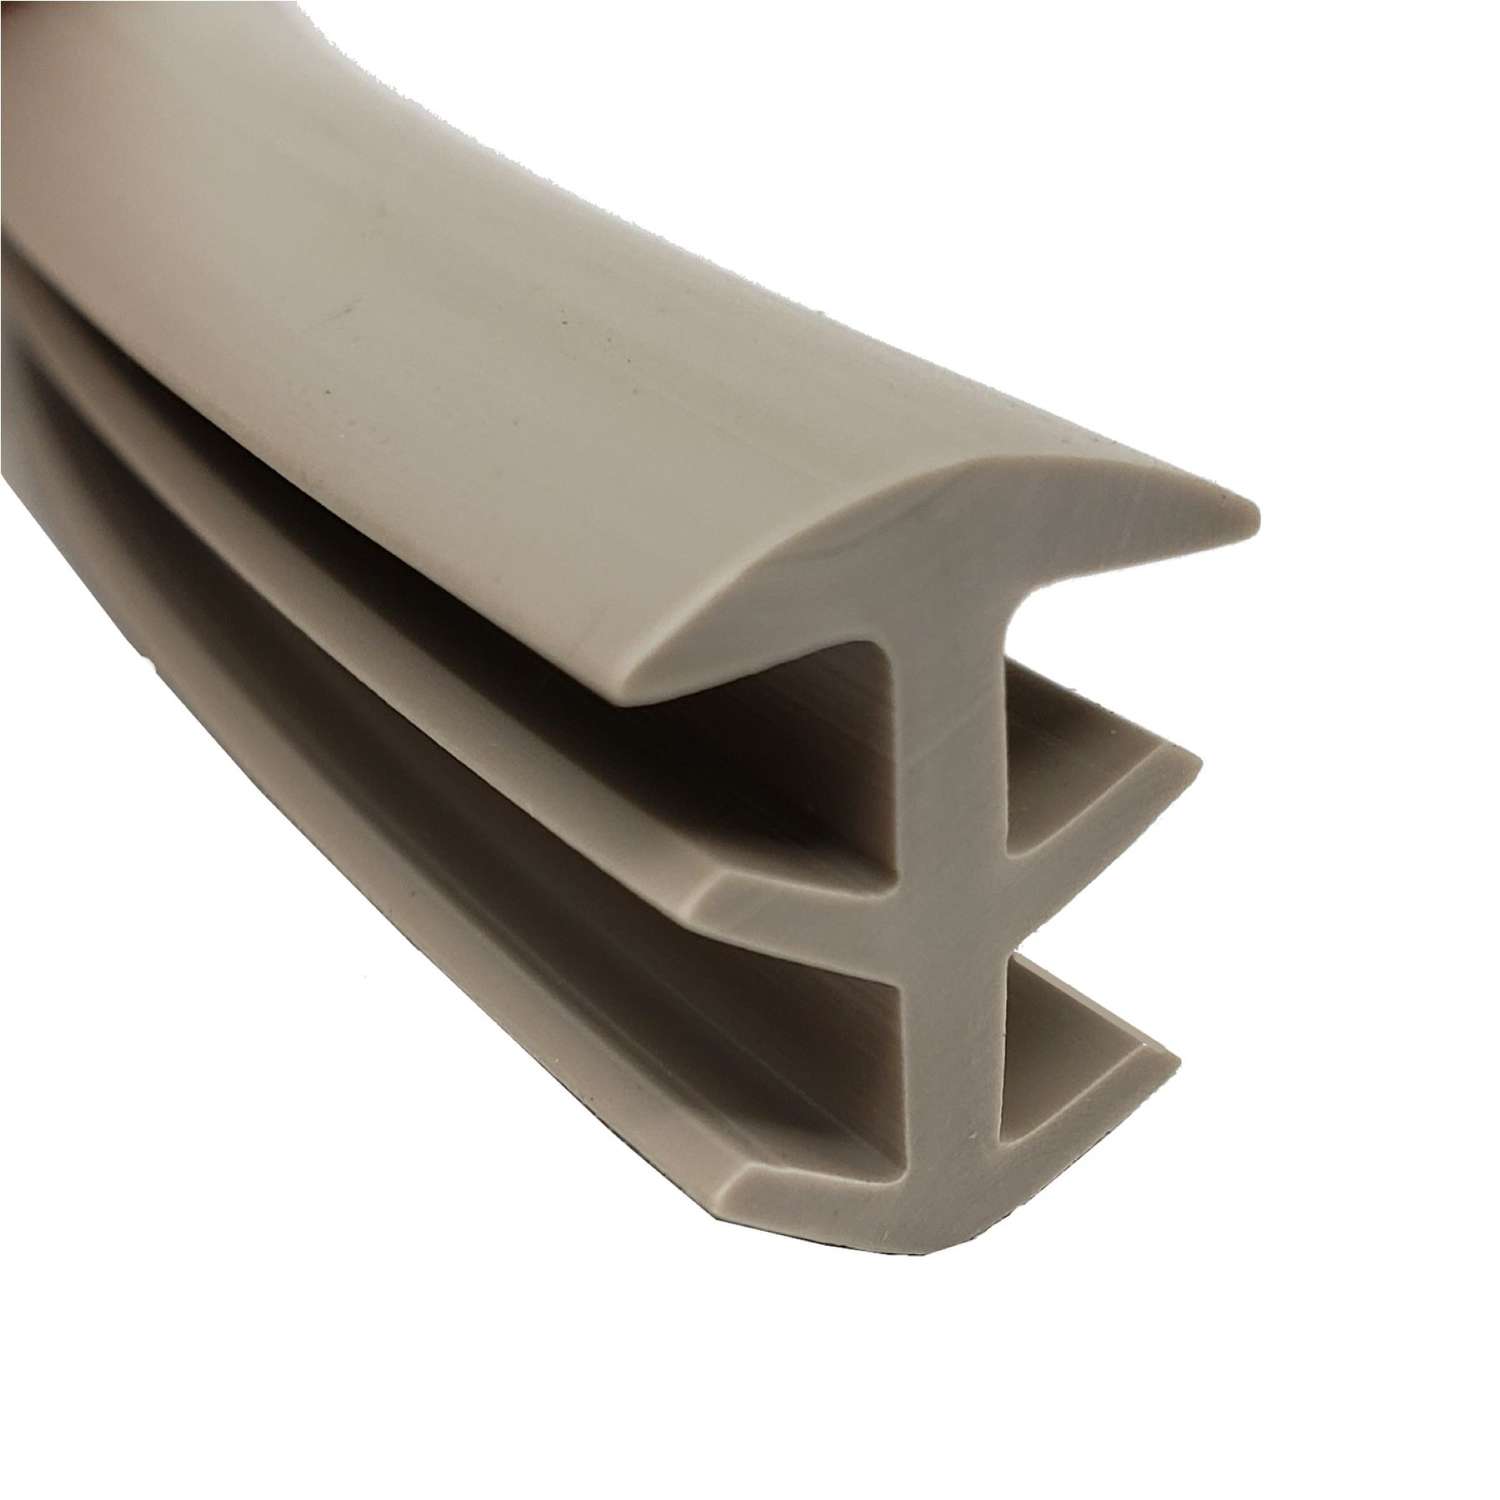 Trim-A-Slab 3/4 in. x 25 ft. Concrete Expansion Joint in